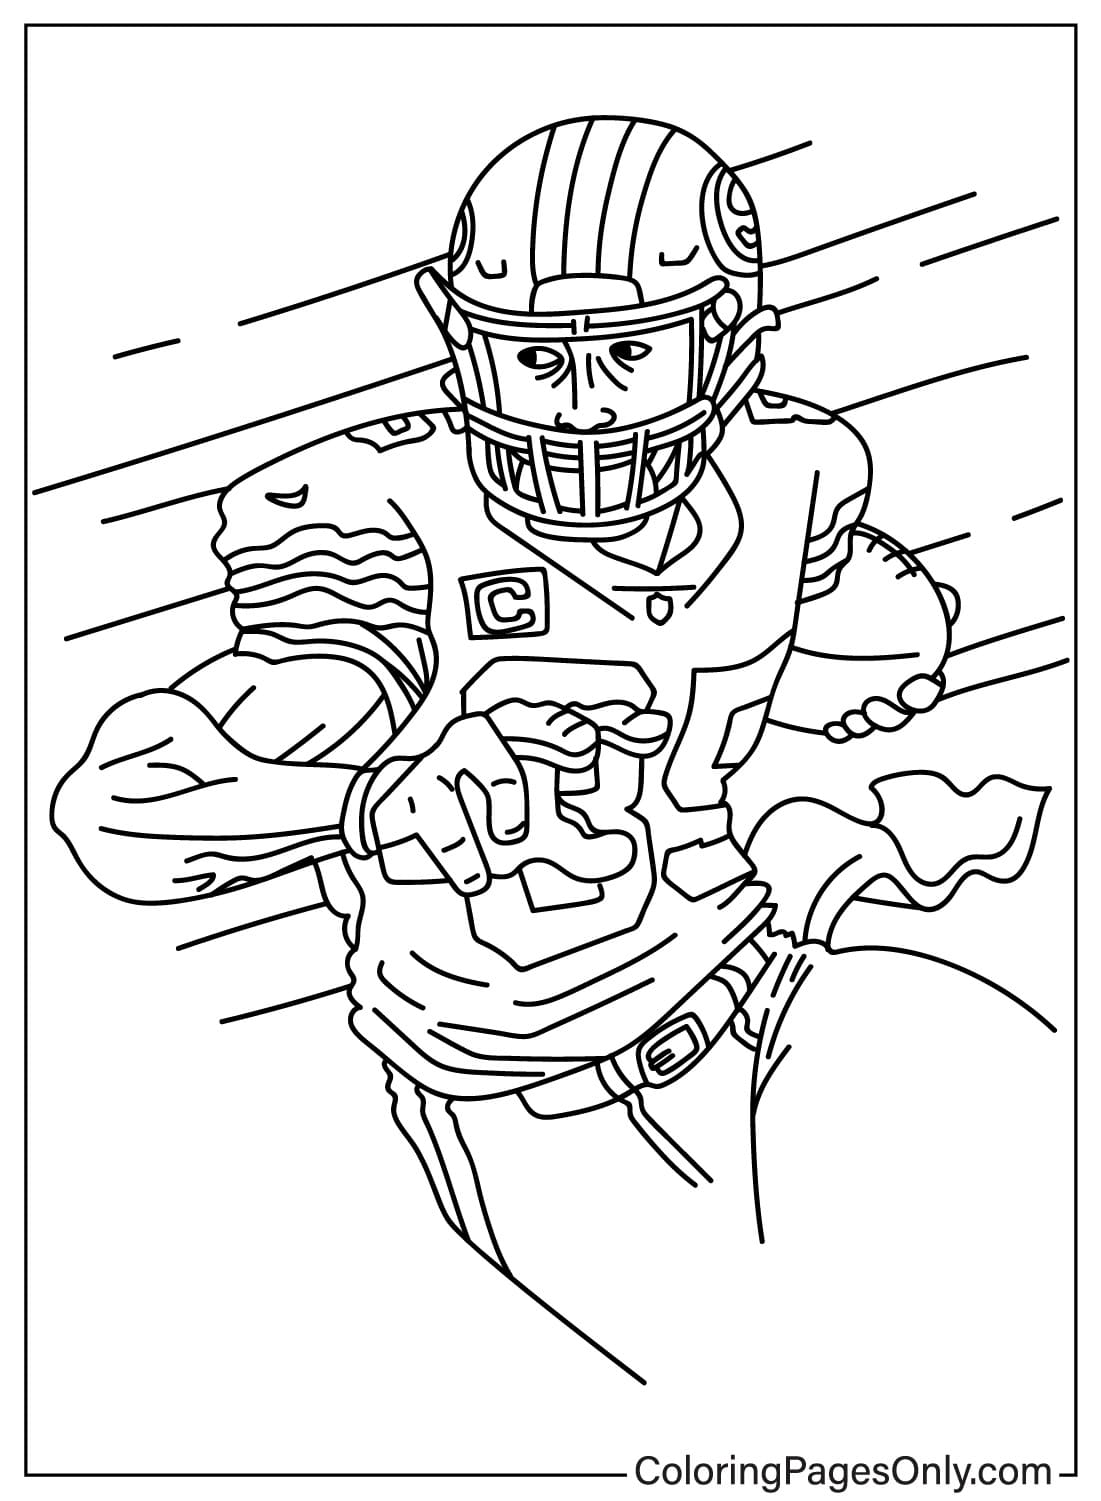 George Kittle Coloring Page from San Francisco 49ers